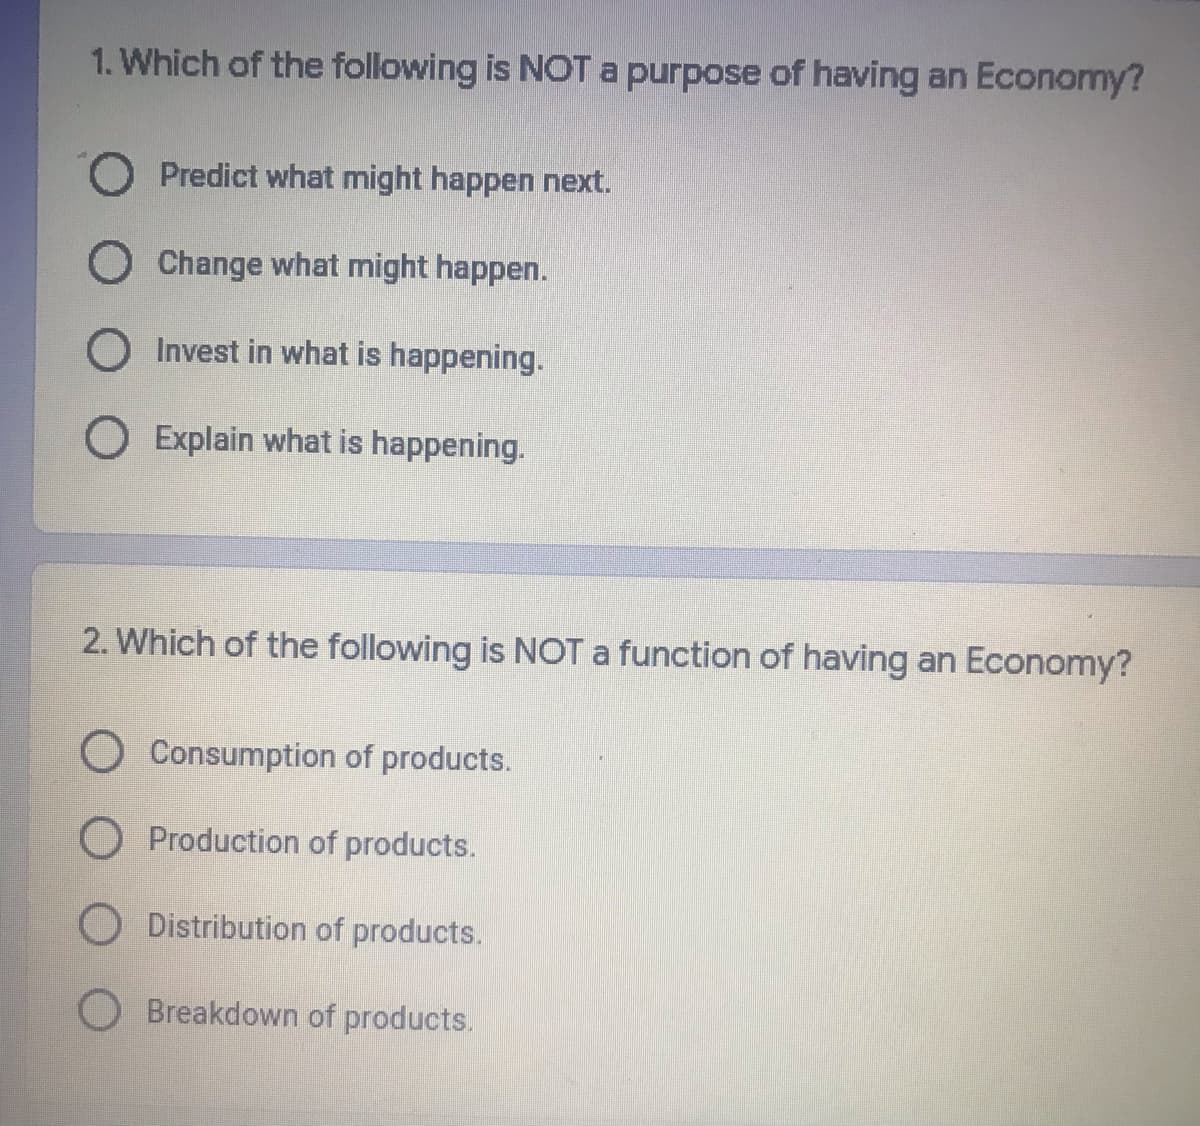 1. Which of the following is NOT a purpose of having an Economy?
O Predict what might happen next.
O Change what might happen.
O Invest in what is happening.
O Explain what is happening.
2. Which of the following is NOT a function of having an Economy?
O Consumption of products.
O Production of products.
O Distribution of products.
O Breakdown of products.
